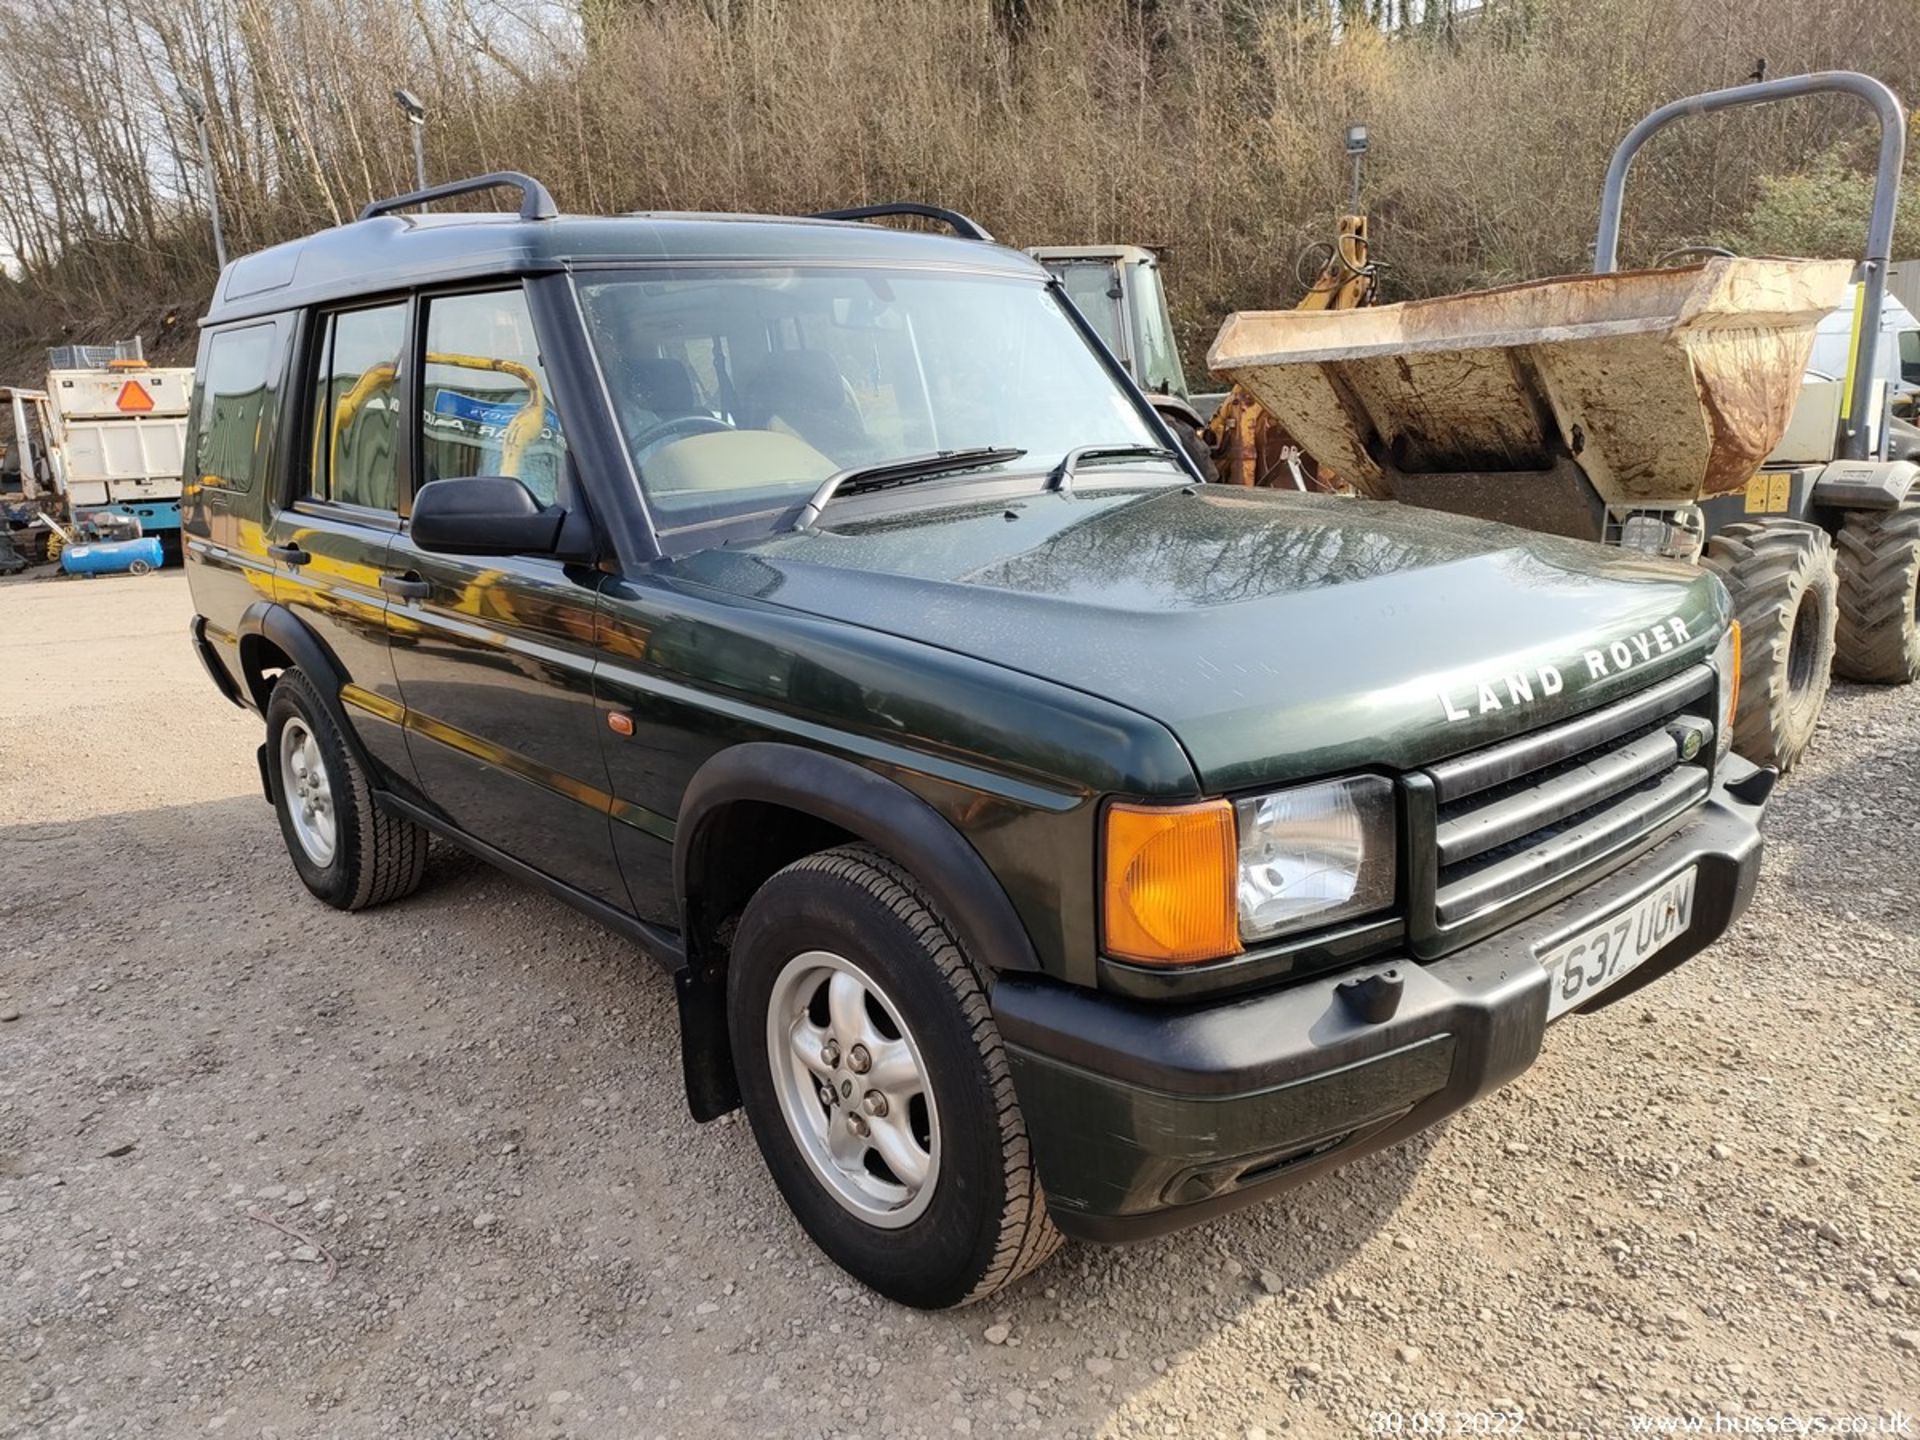 1999 LAND ROVER DISCOVERY TD5 GS - 2495cc 5dr Estate (Green)